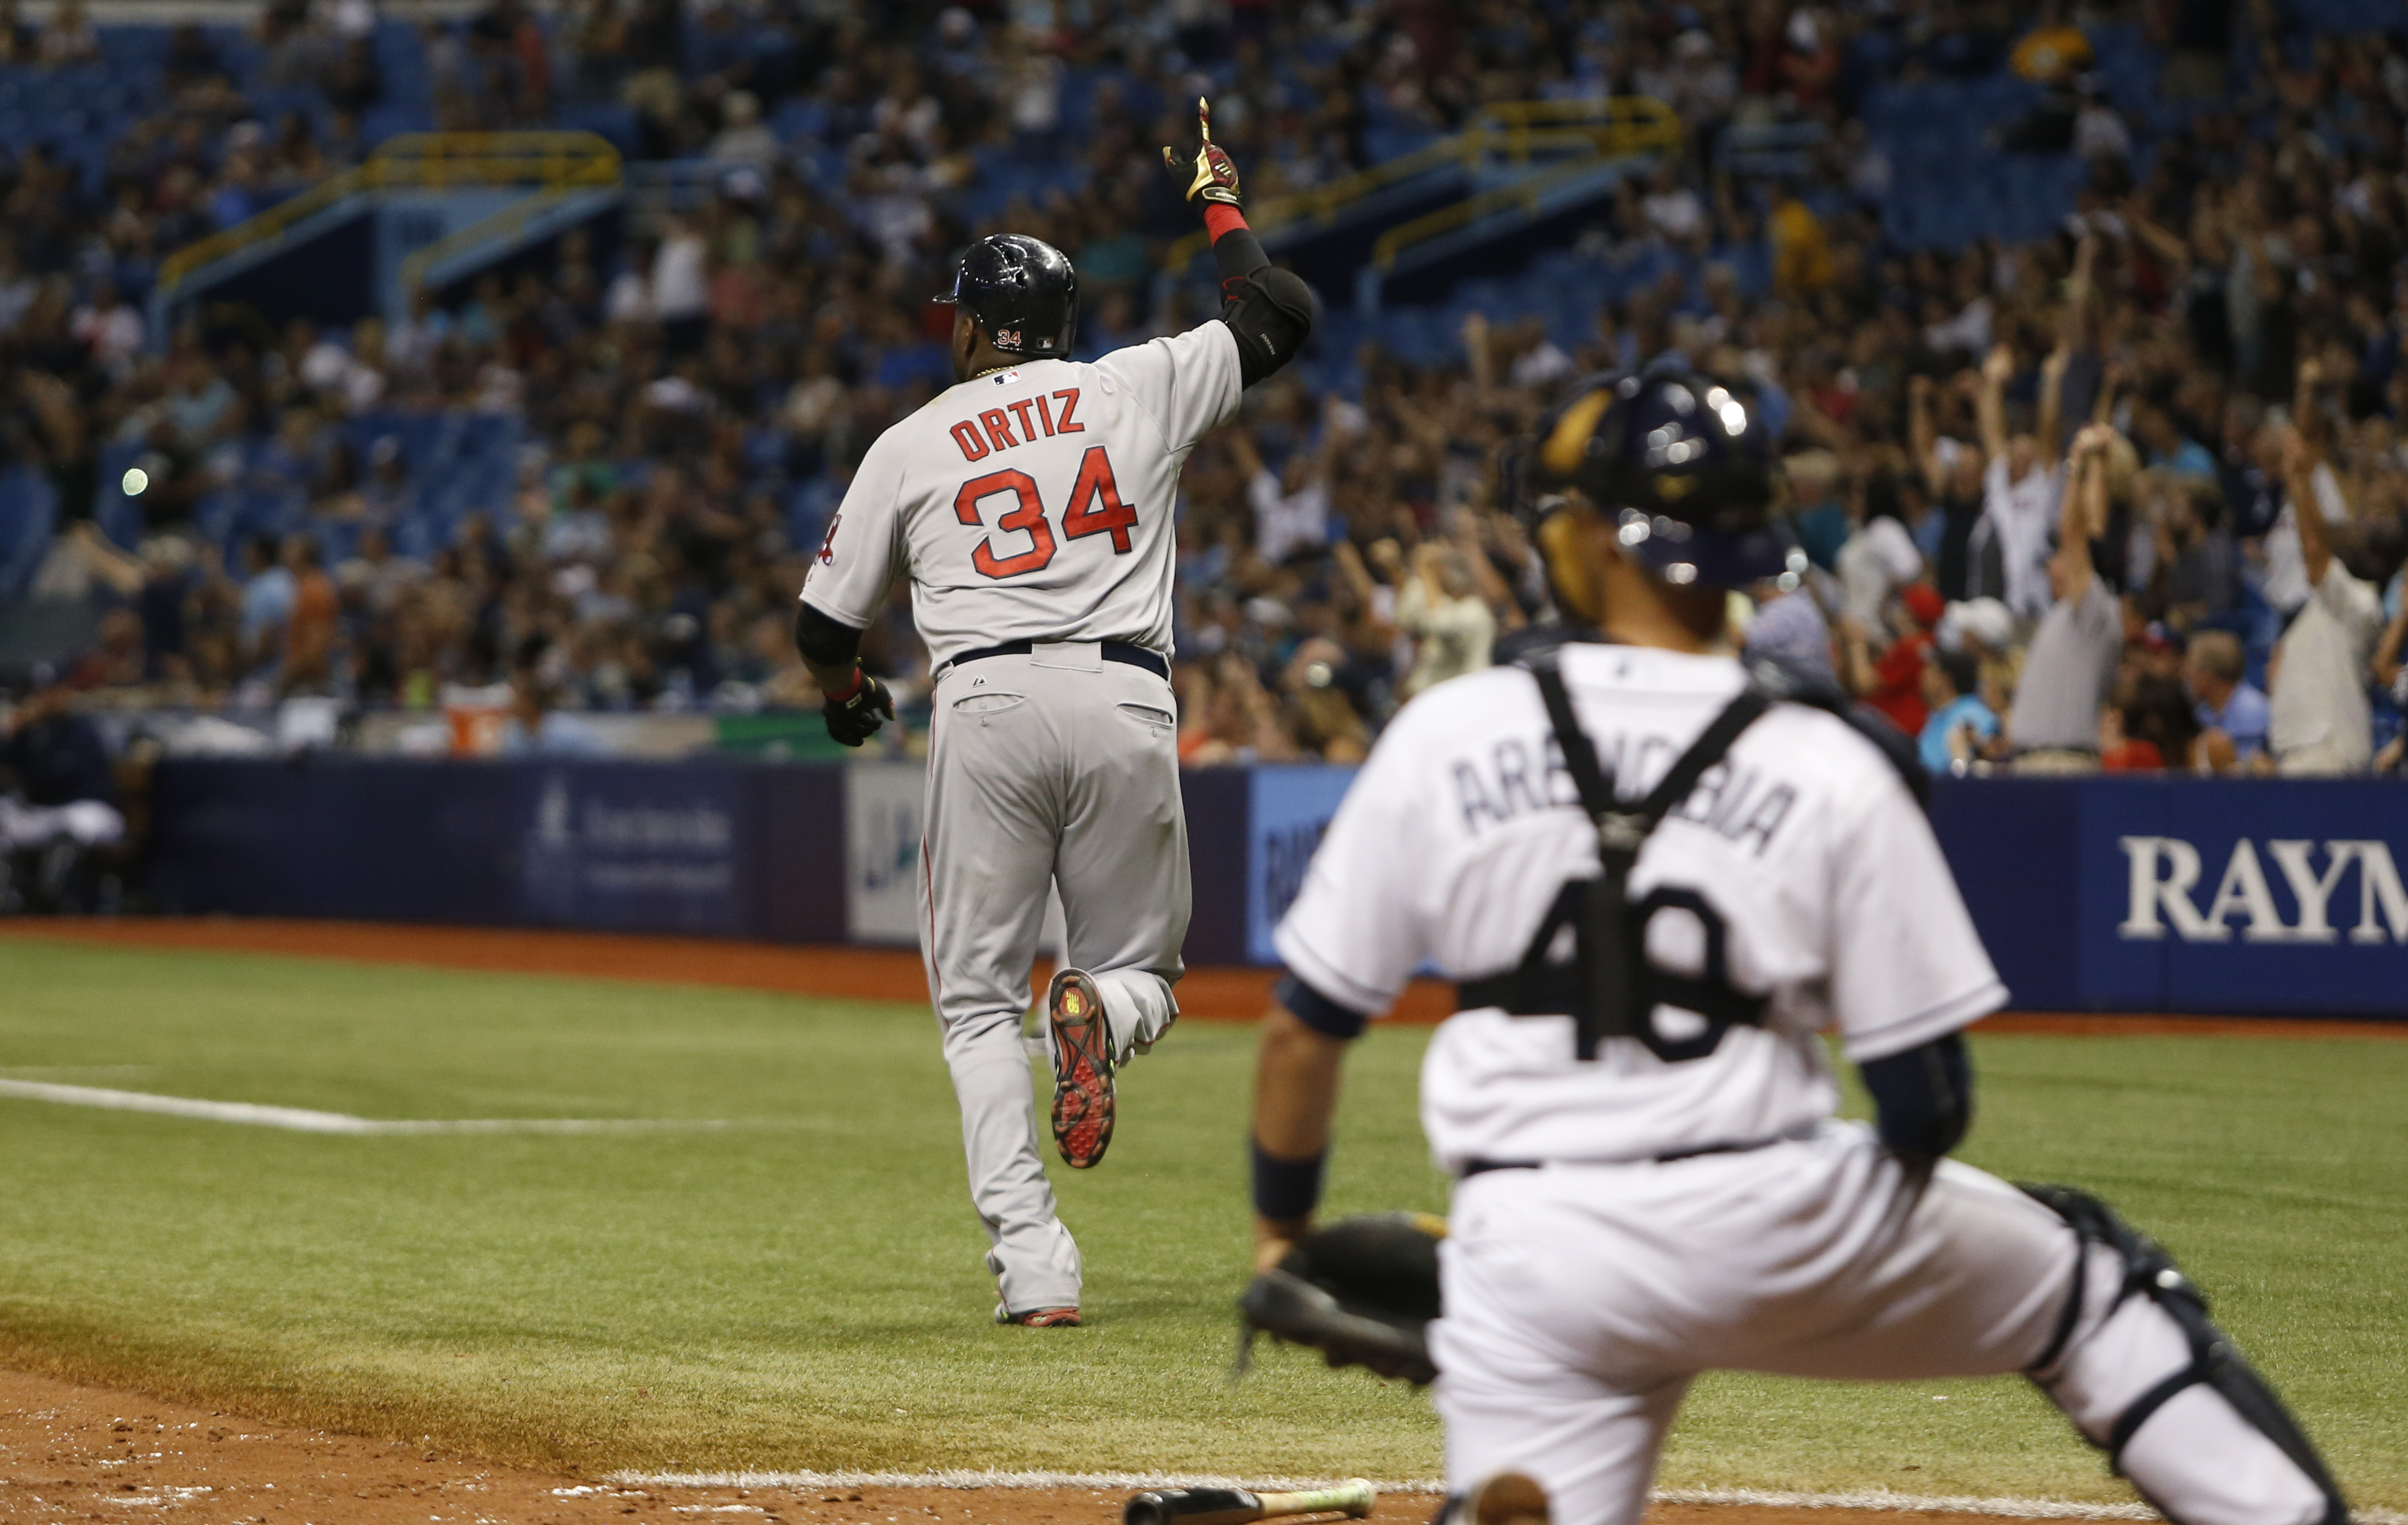 David Ortiz hits 500th home run in fifth inning of Red Sox-Rays